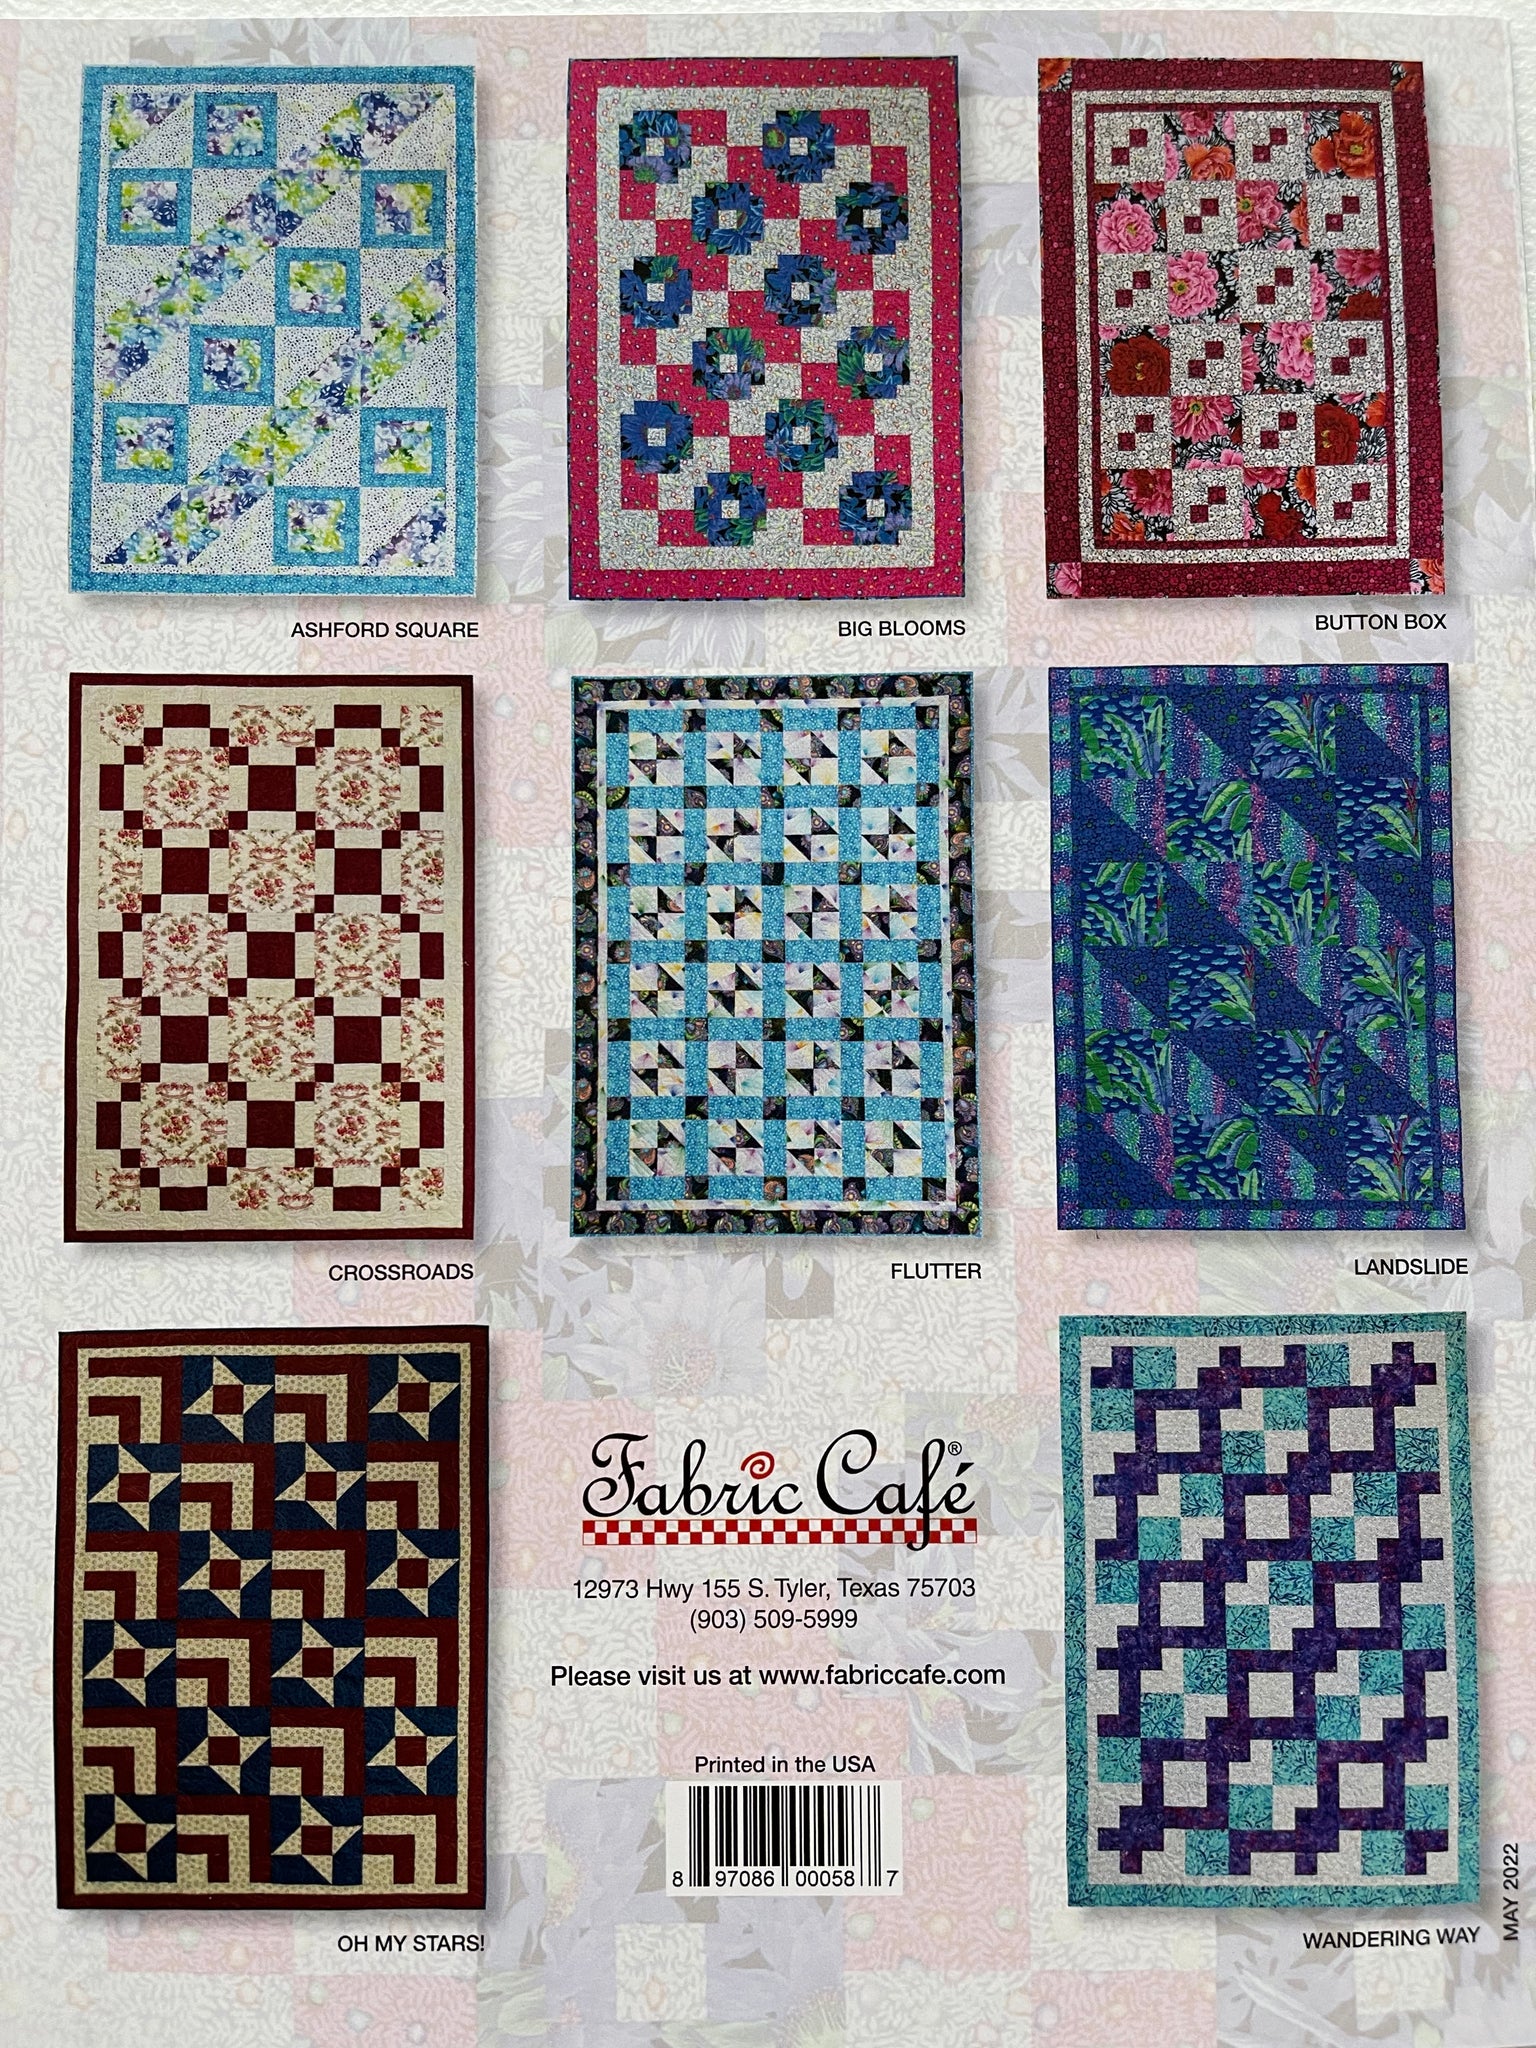 3 Yard Quilt Pattern Books – Stitches in the Window